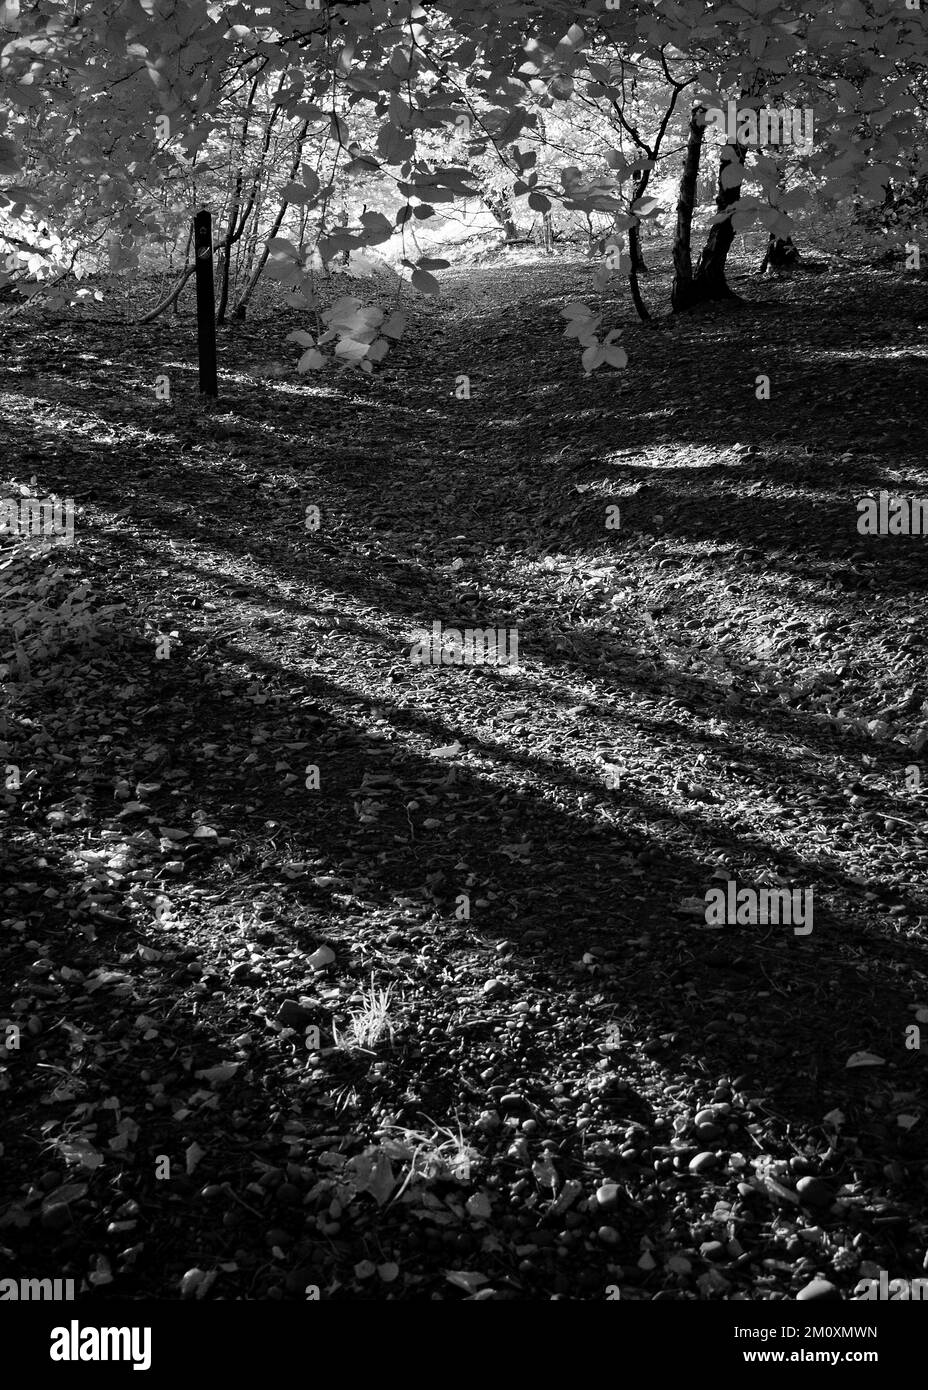 Fine art photograph of trees in black and white, an image of nature in late summer, in the woodlands and forests of Cannock Chase AONB Stock Photo